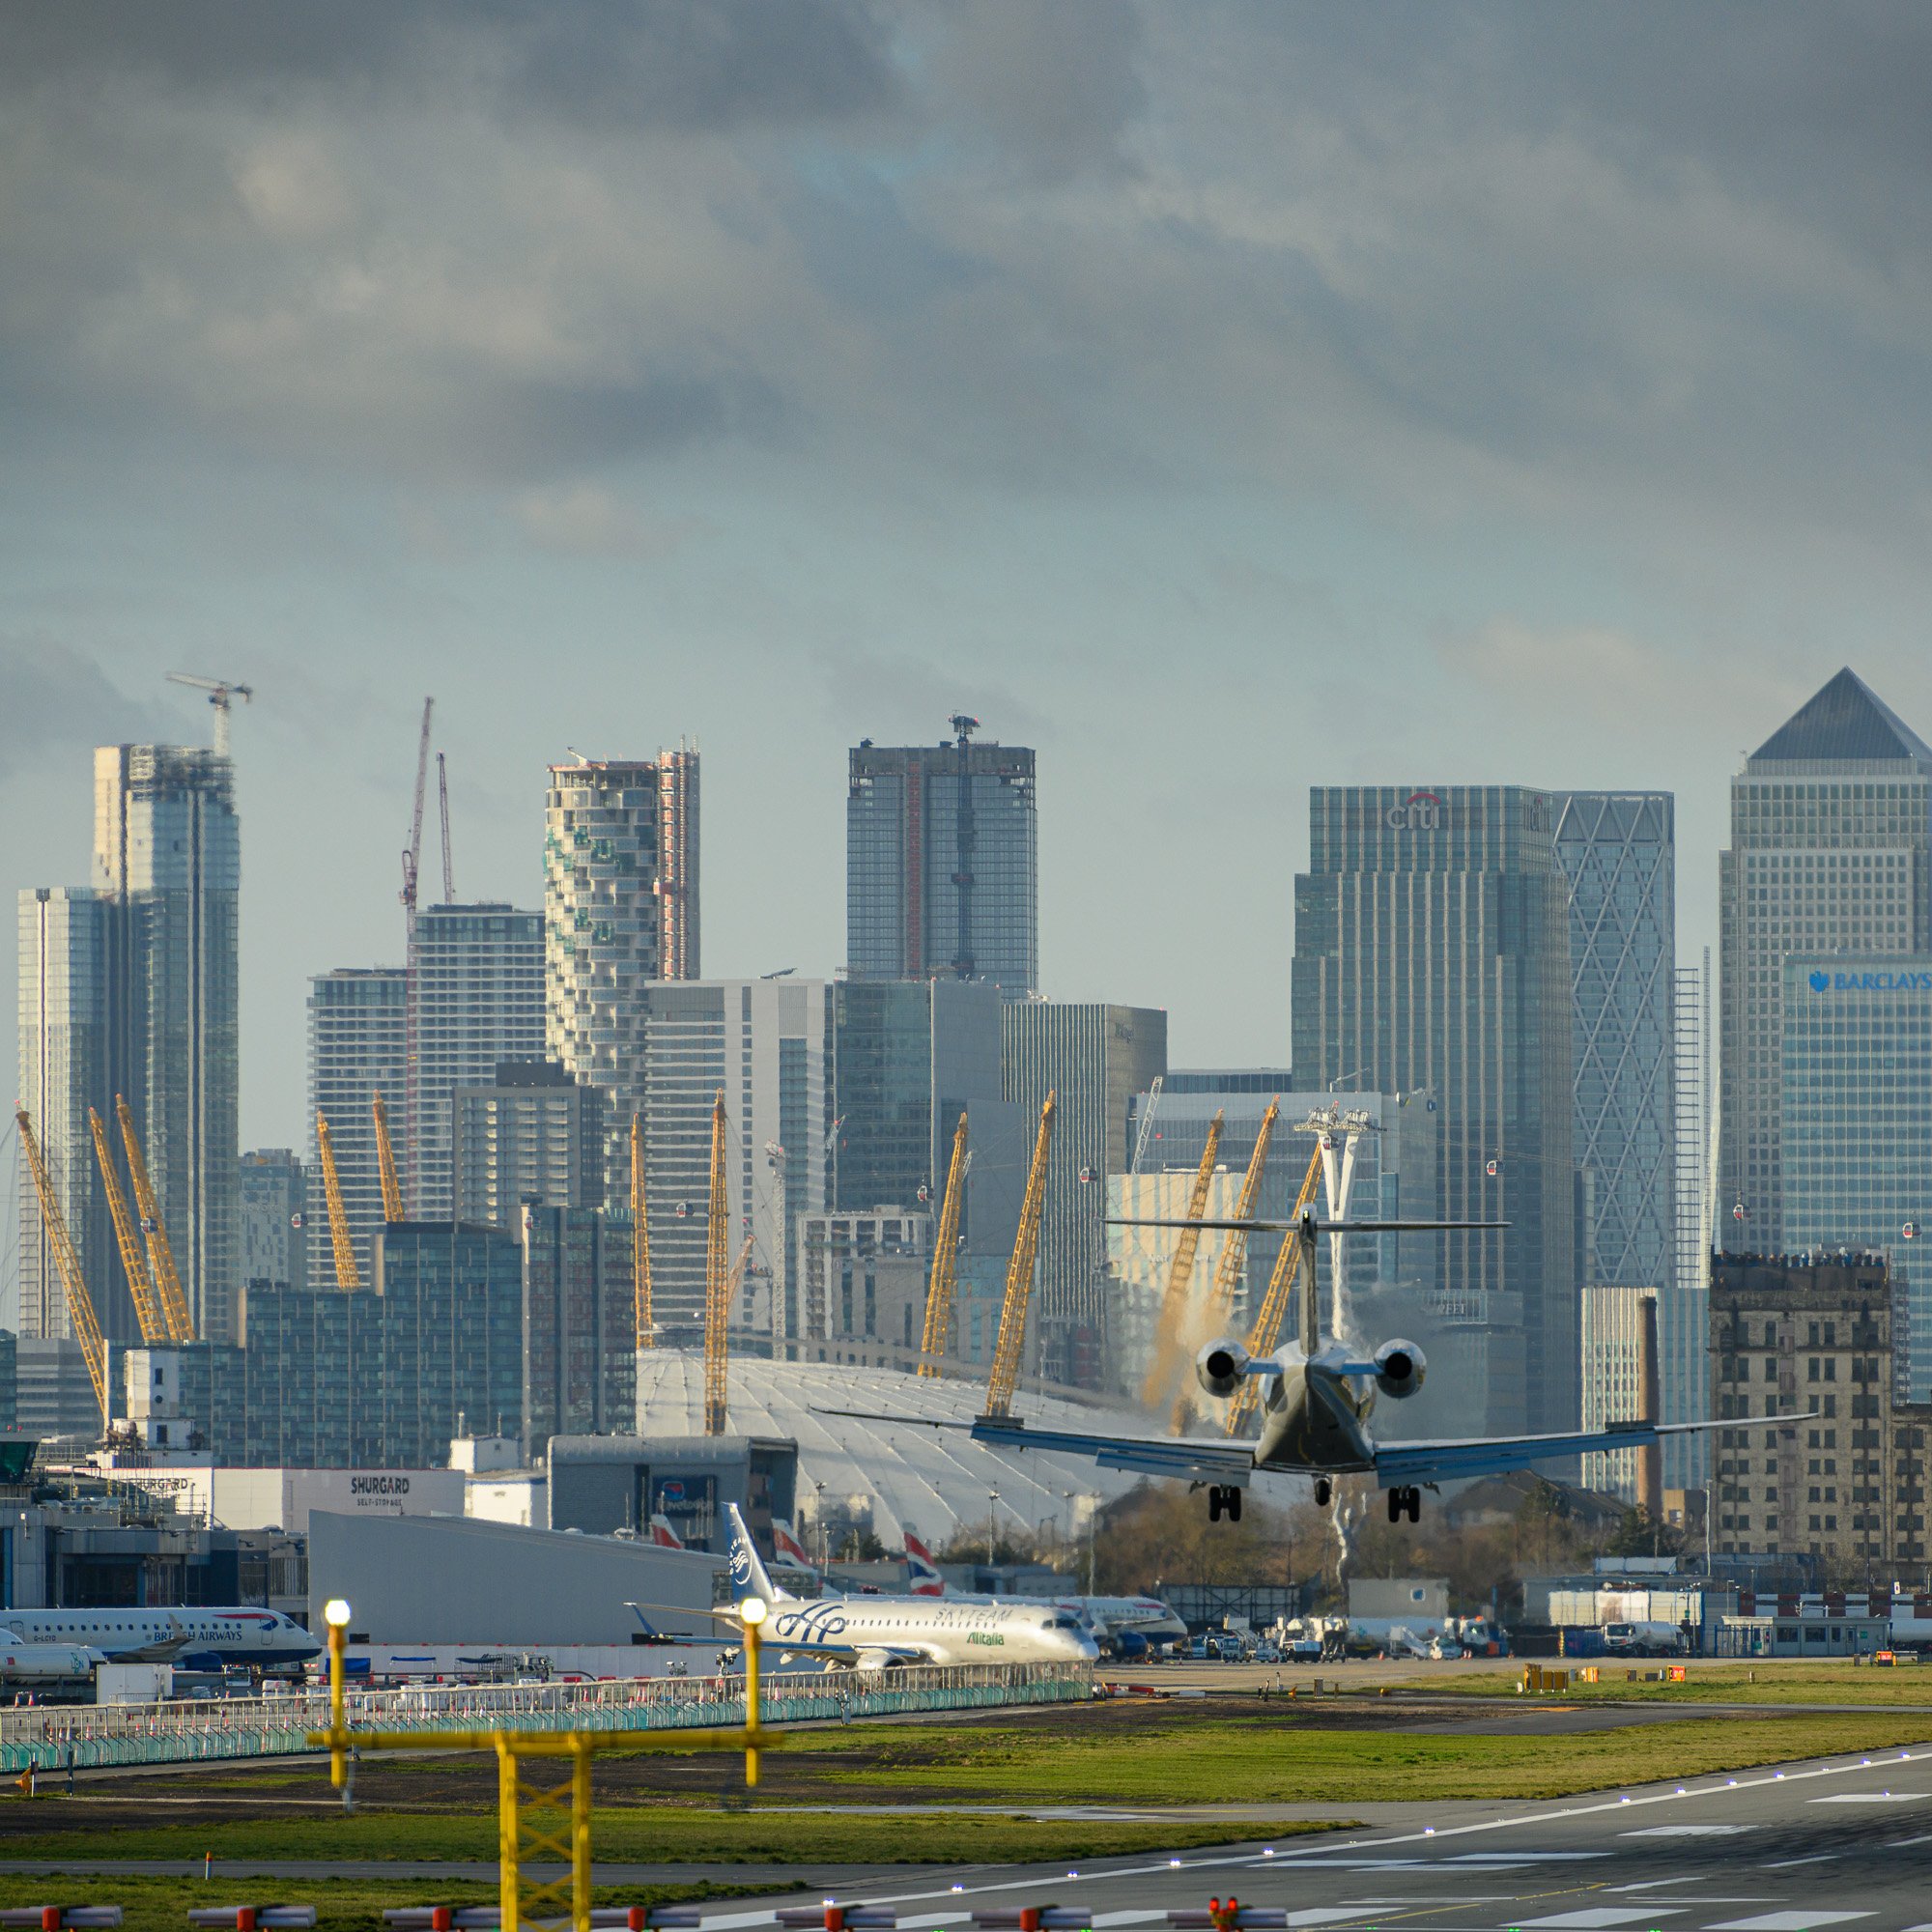 Arrival at London City airport